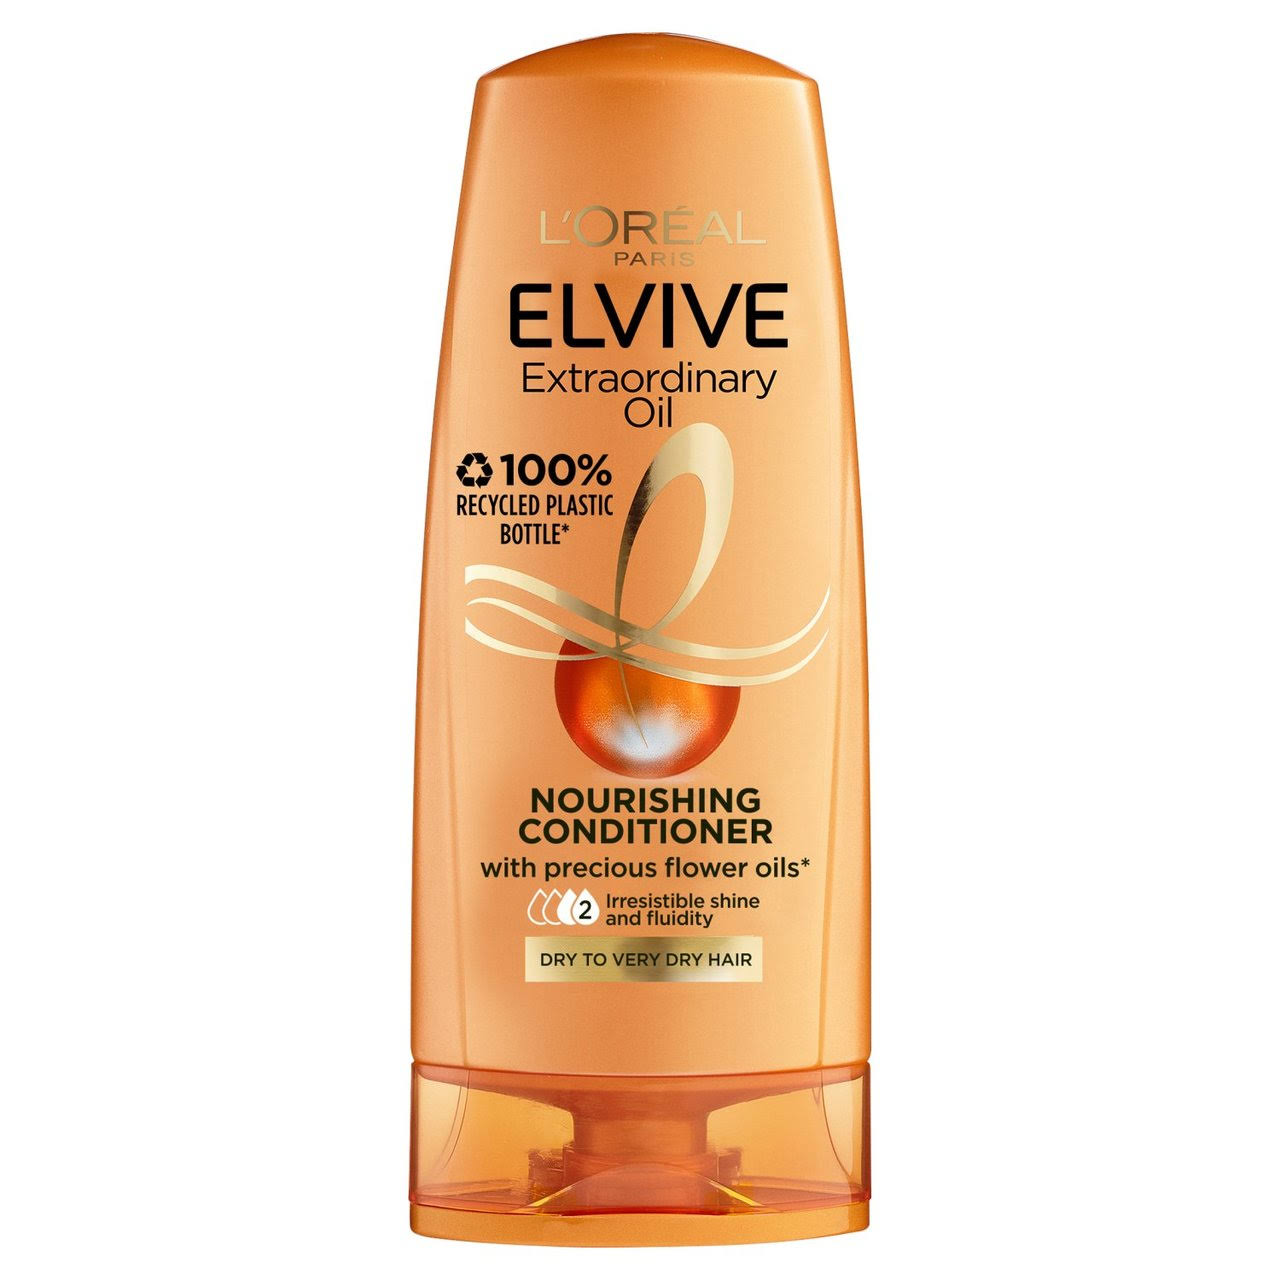 L'Oreal Elvive Extraordinary Oil Dry Hair Conditioner 300ml